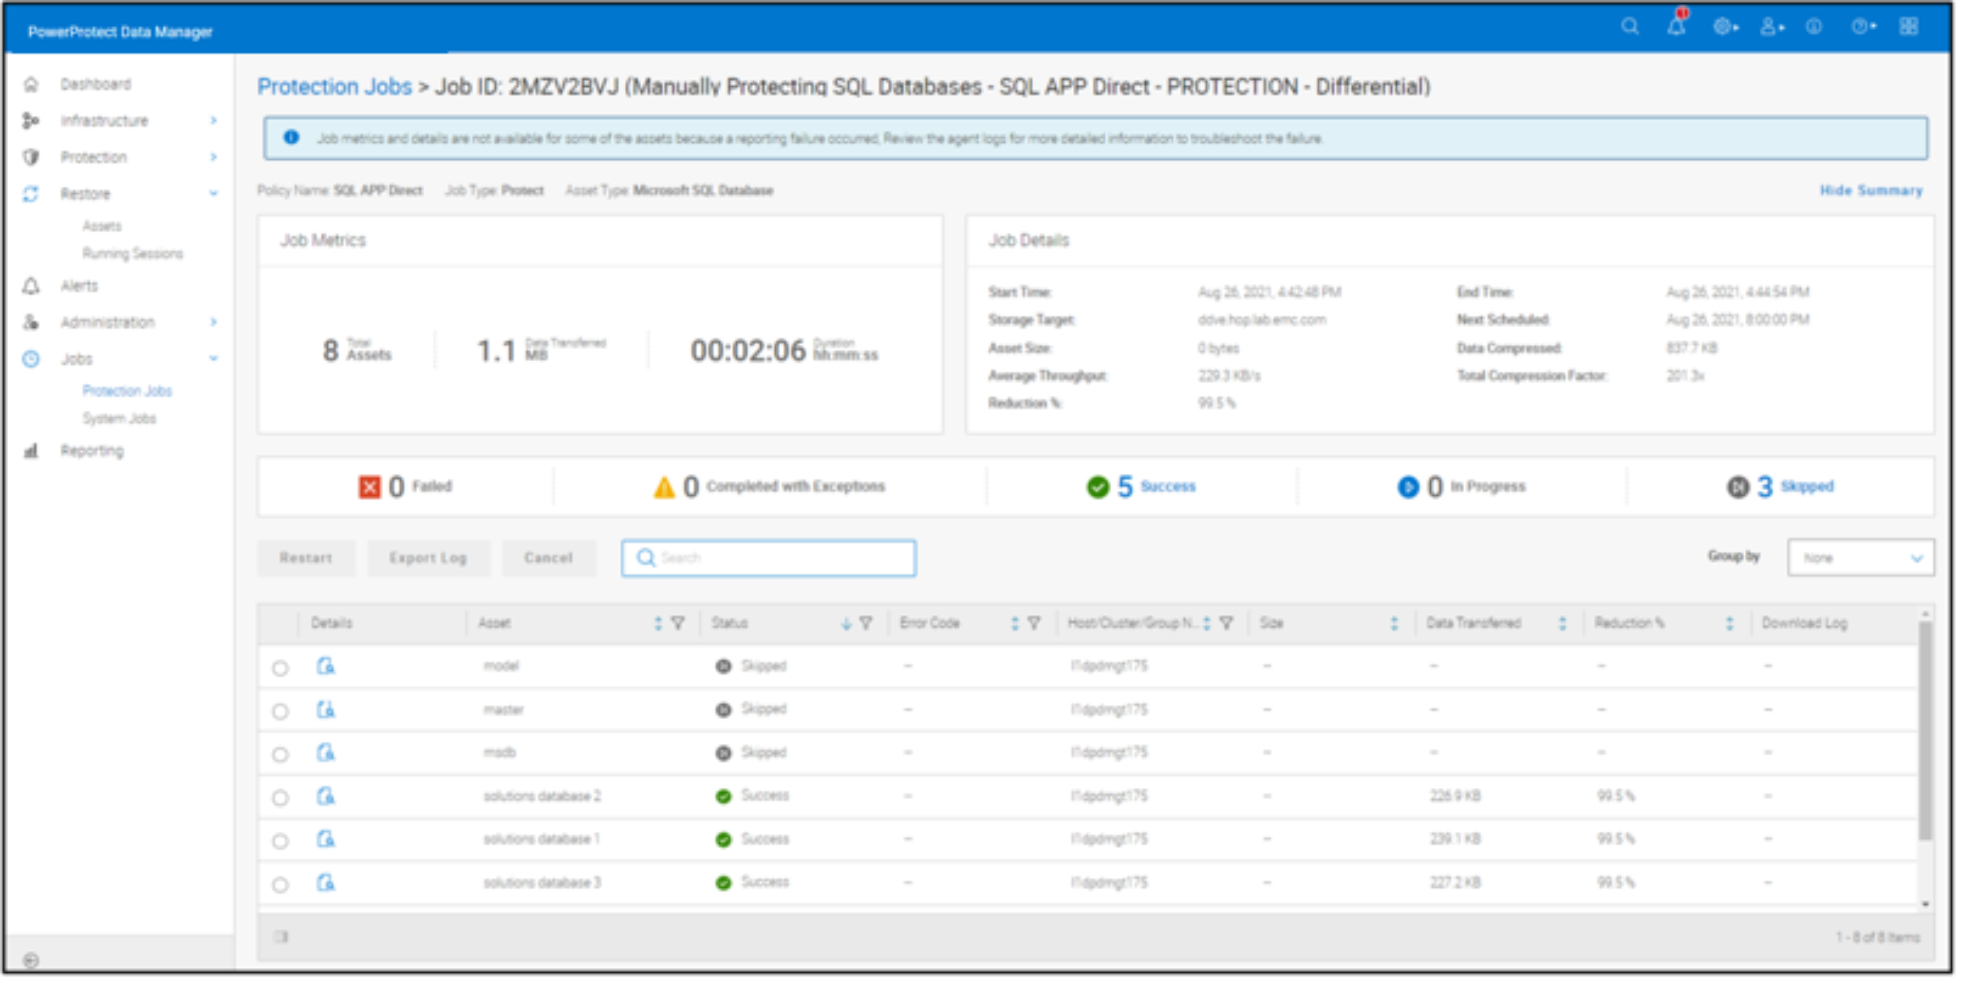 The image shows the protection jobs notification for skipped database assets from backup.